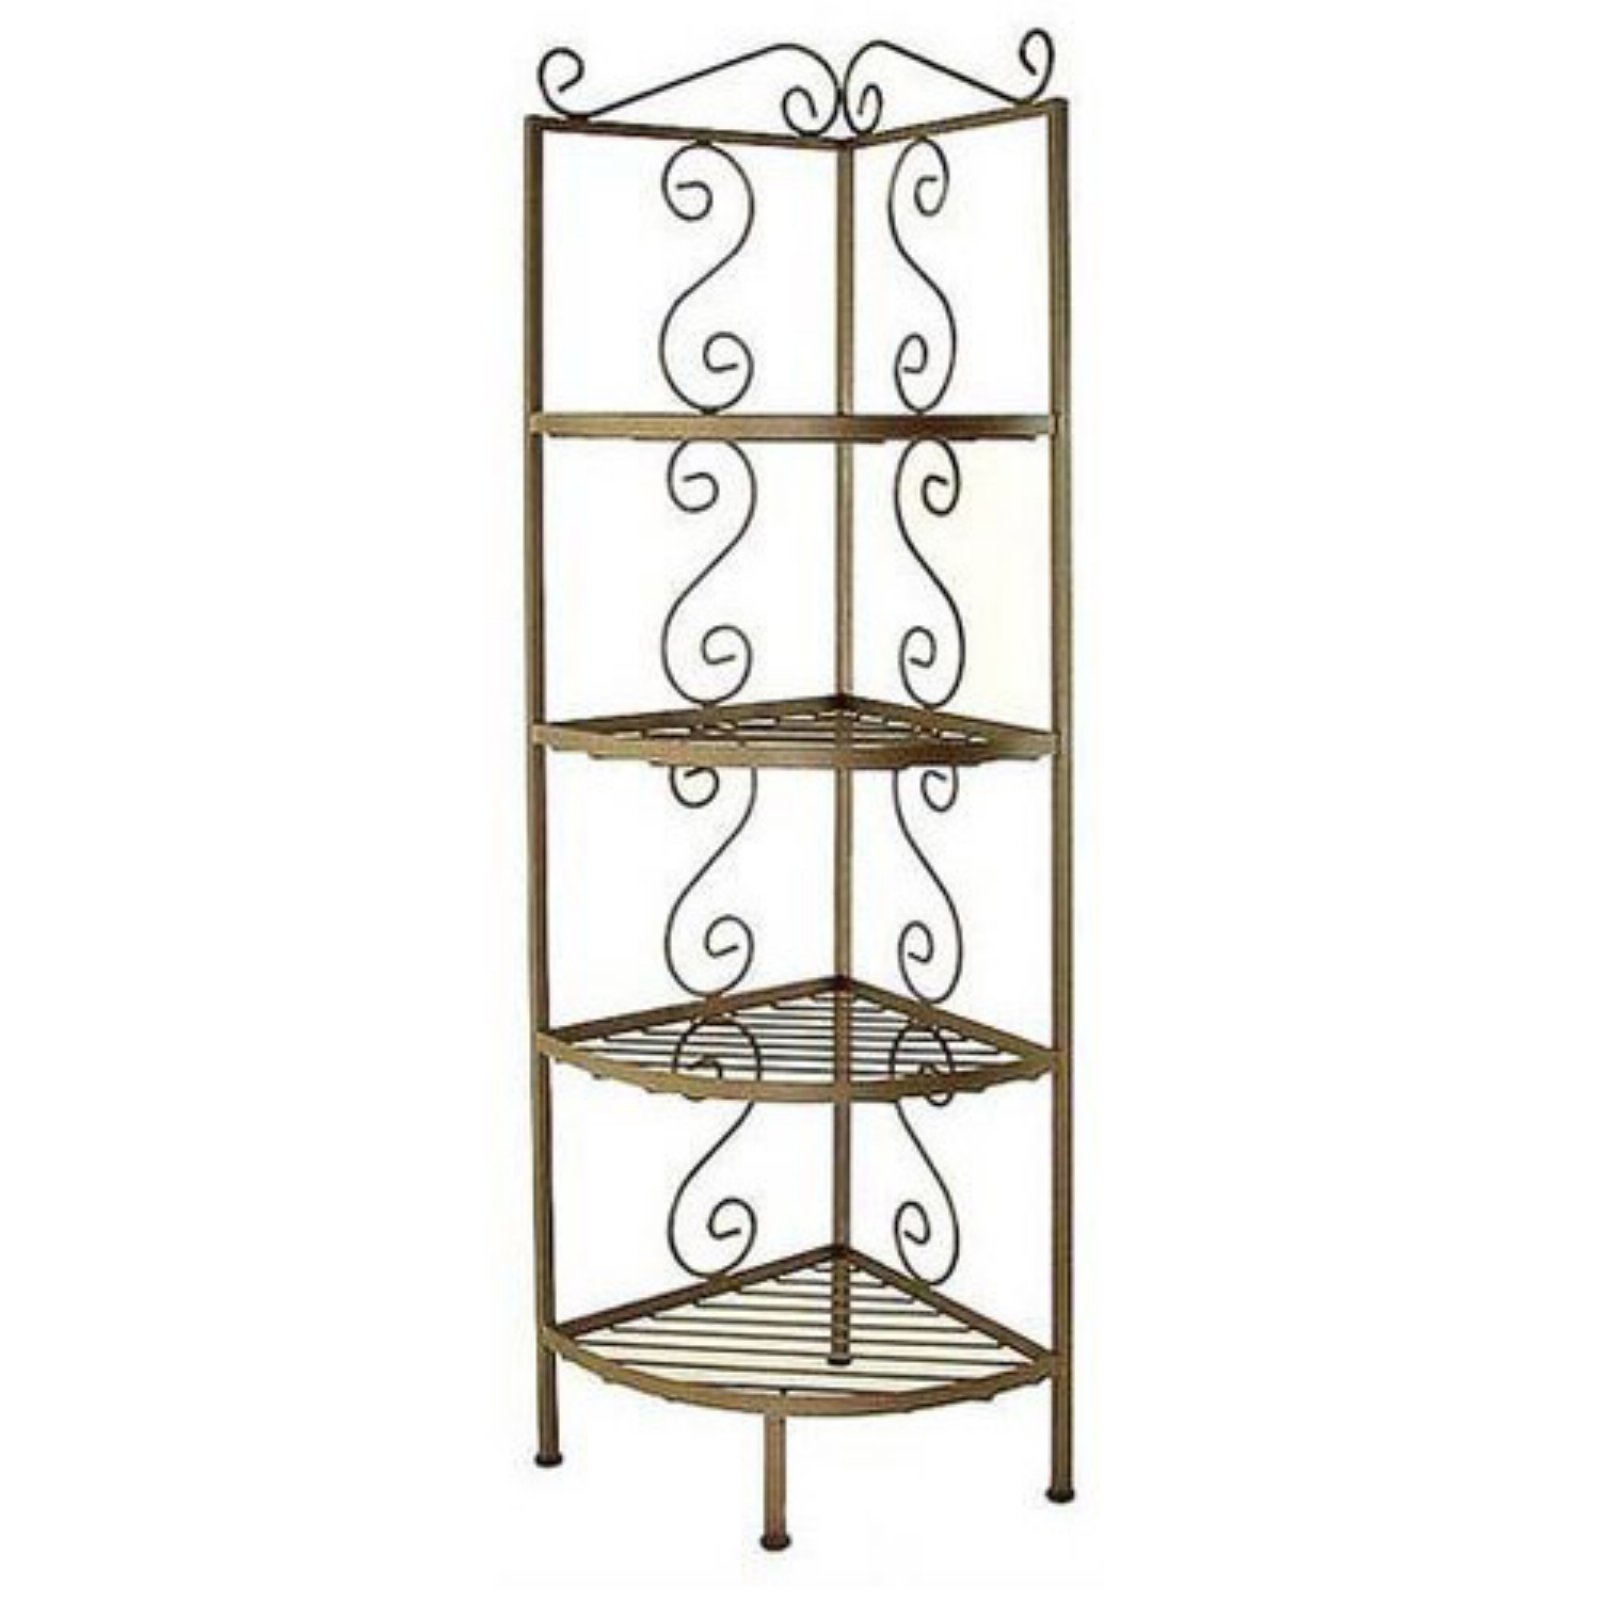 18" Wrought Iron Corner Bakers Rack Finish: Aged Iron, Brass Tips: With Brass Tips